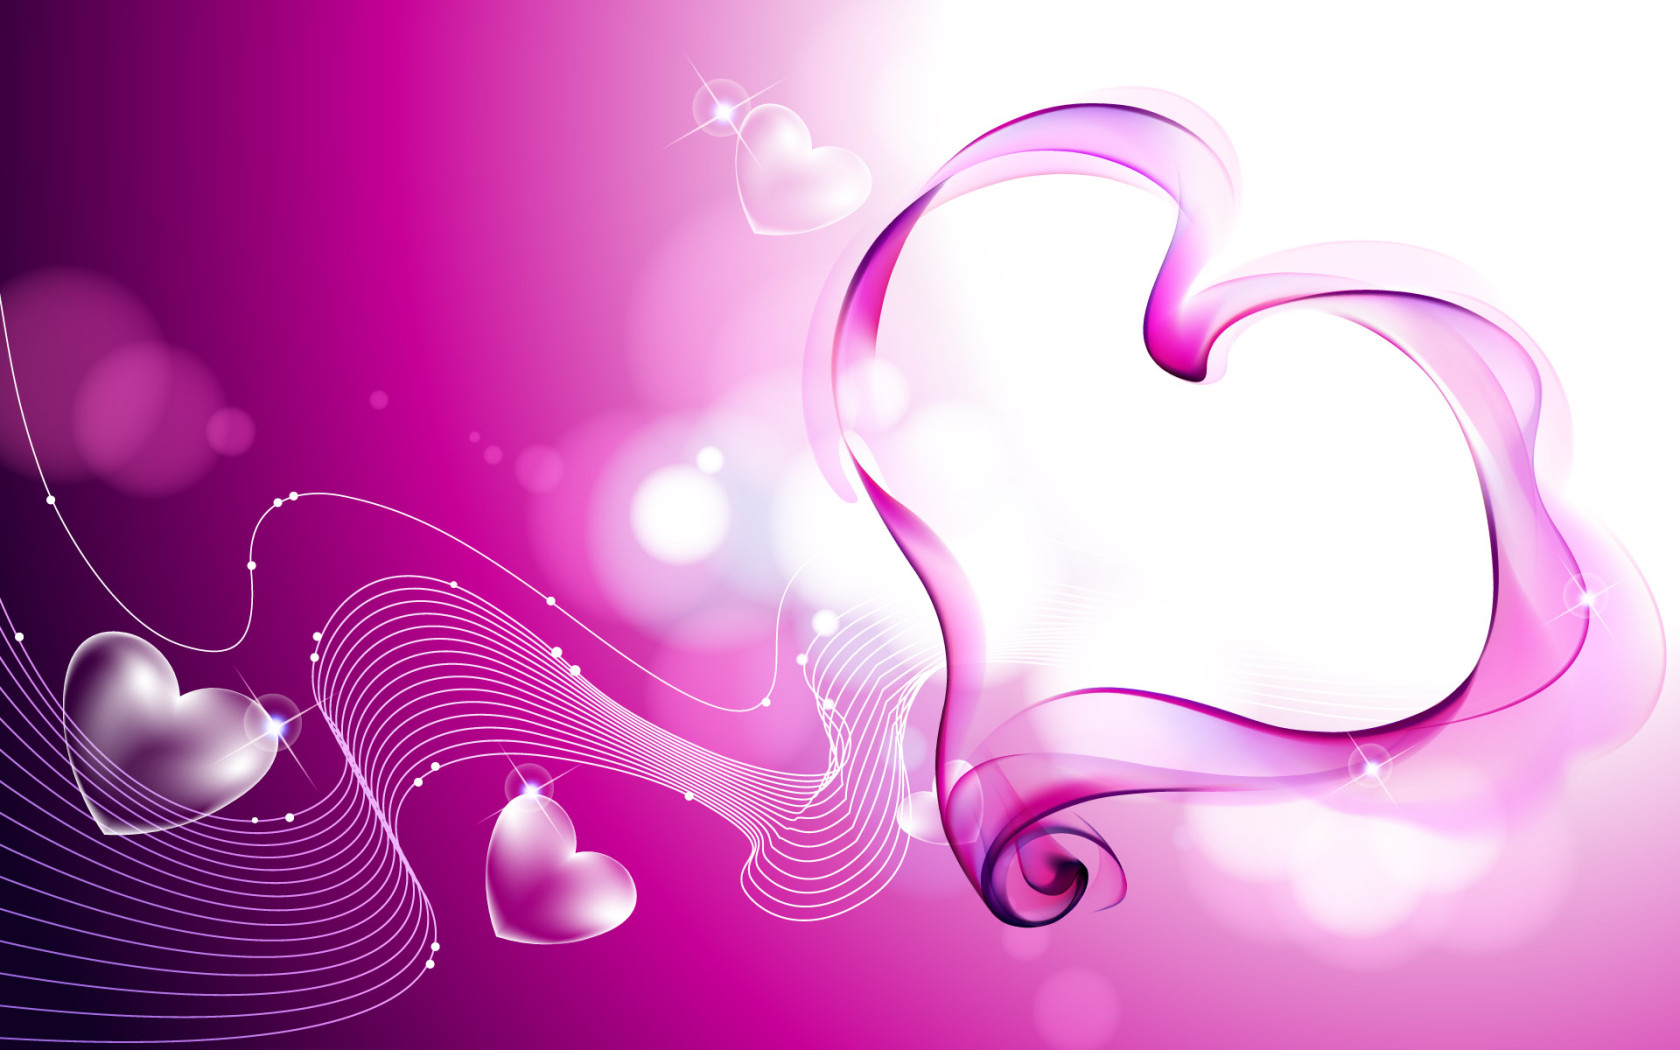 Previous, Saint Valentines Day - Beautiful pink hearts wallpaper